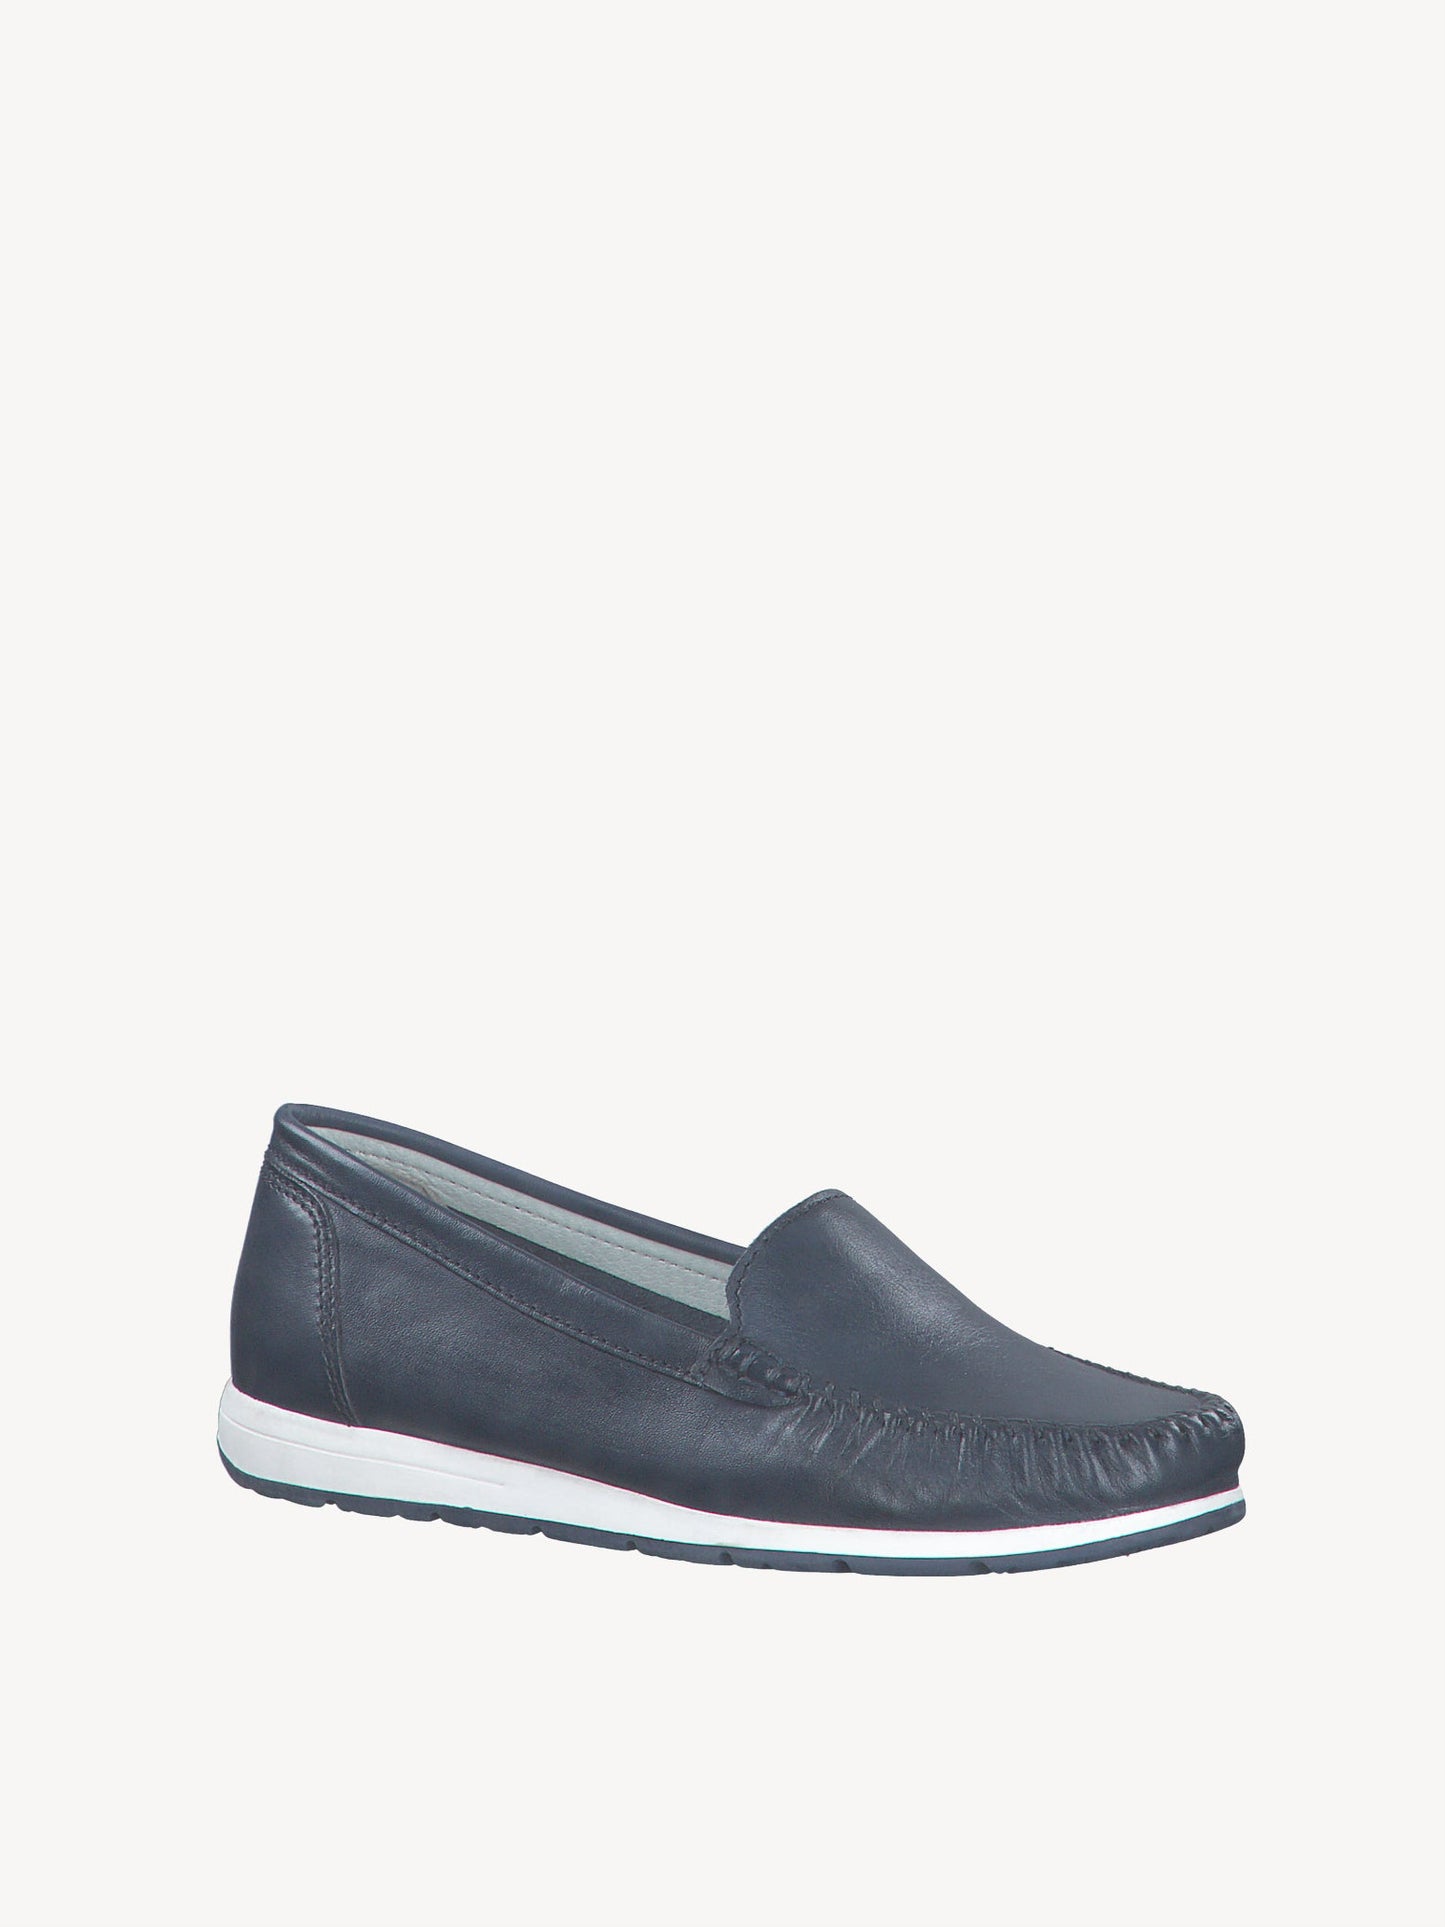 Marco Tozzi - Loafer - 24600